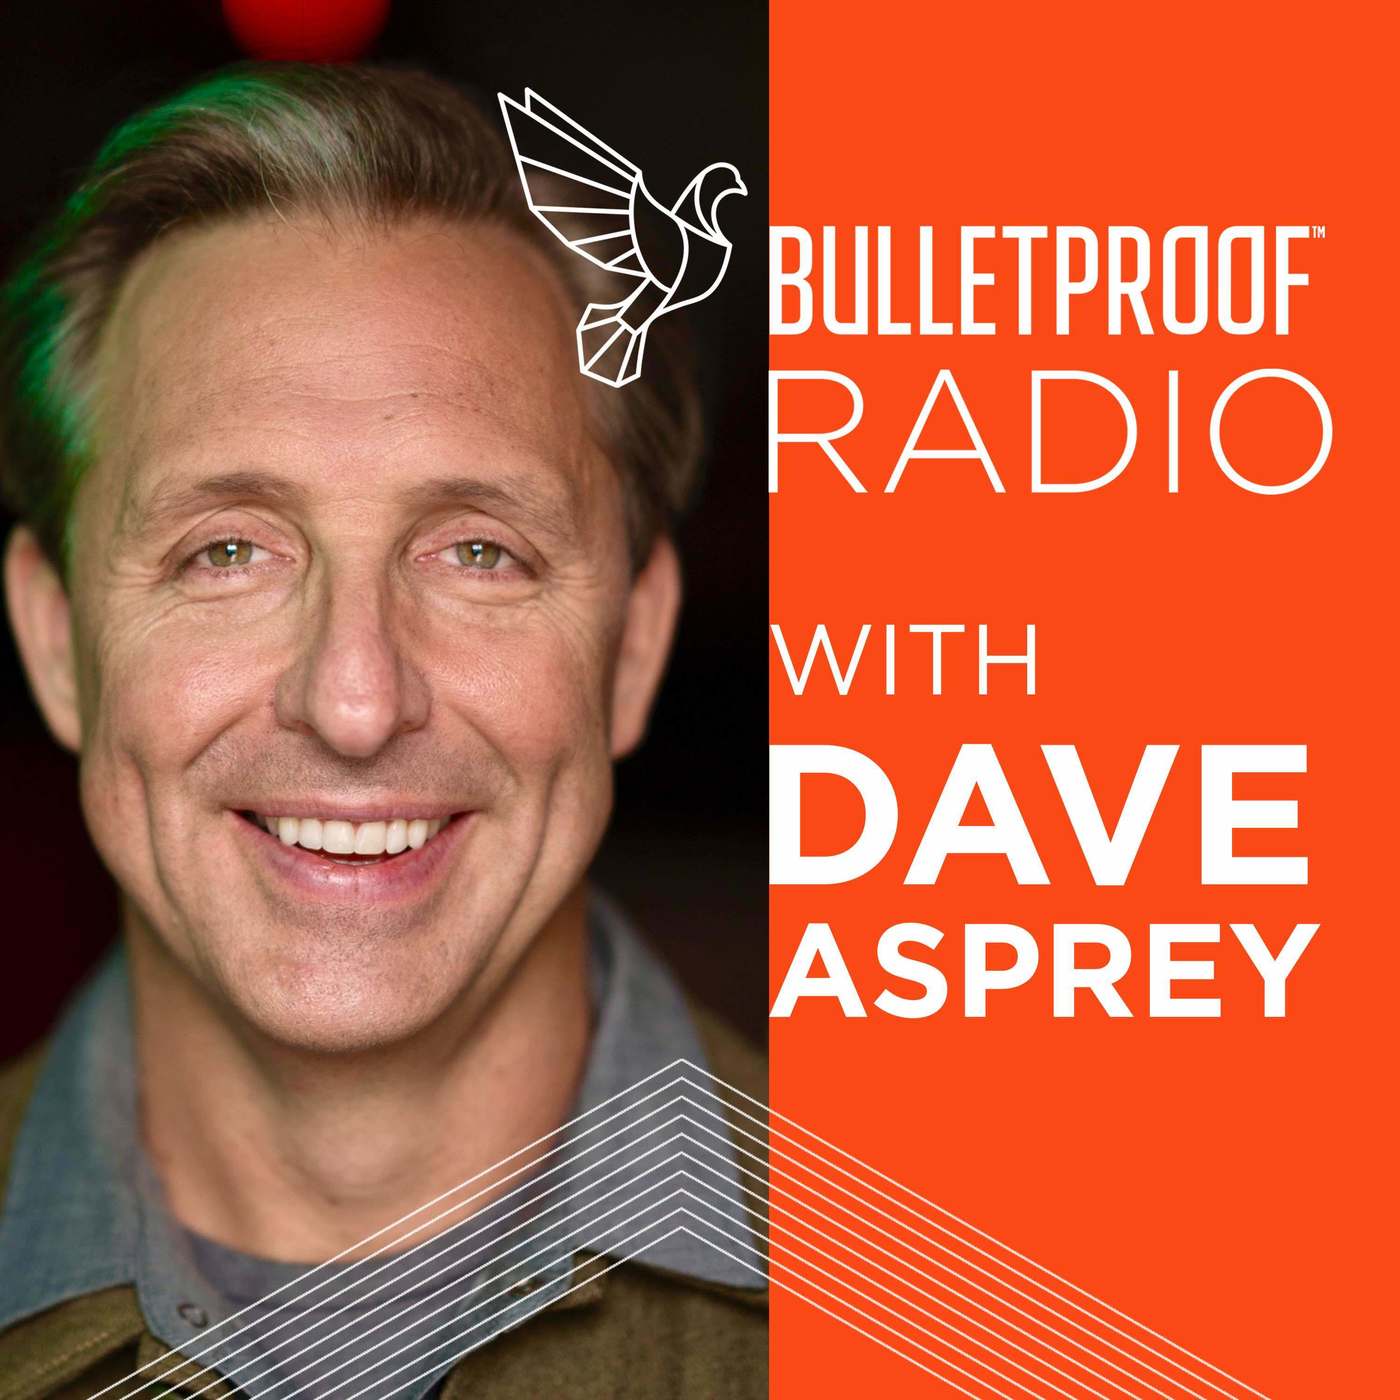 Bad Science and Diet Lies Keep Feeding Obesity: Gary Taubes with Dave Asprey